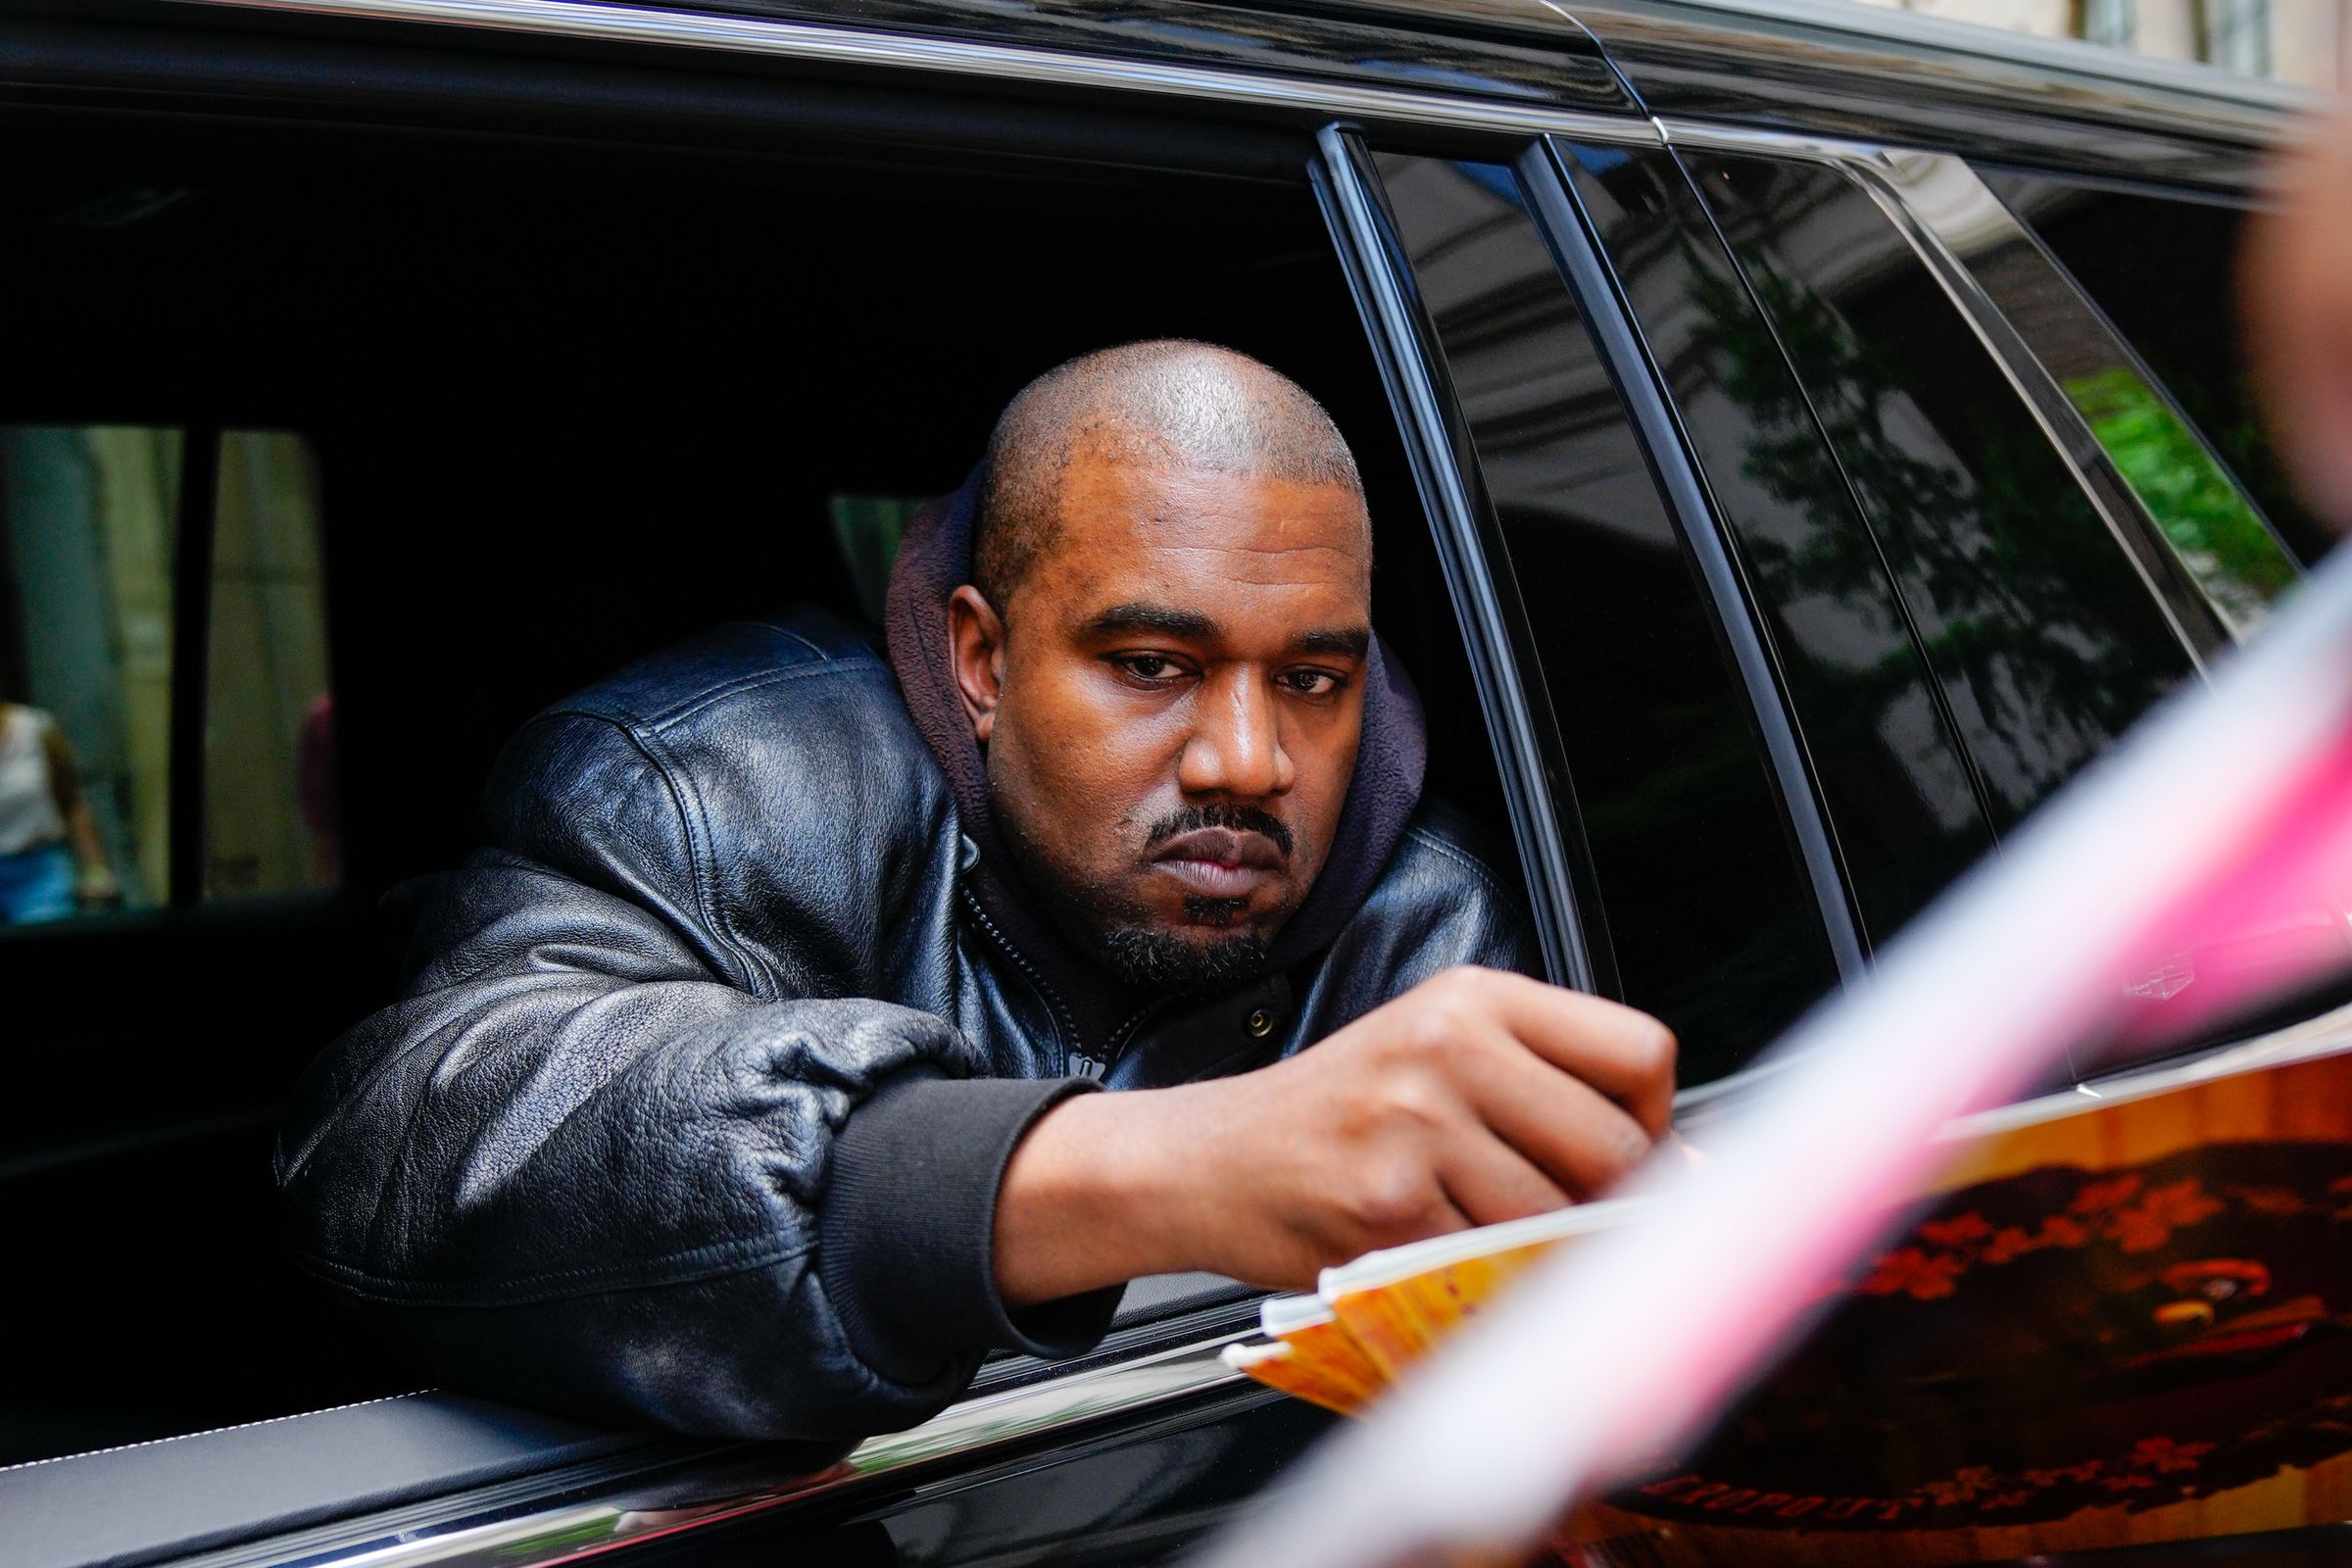 A photo of Kanye West signing an autograph outside of a car window